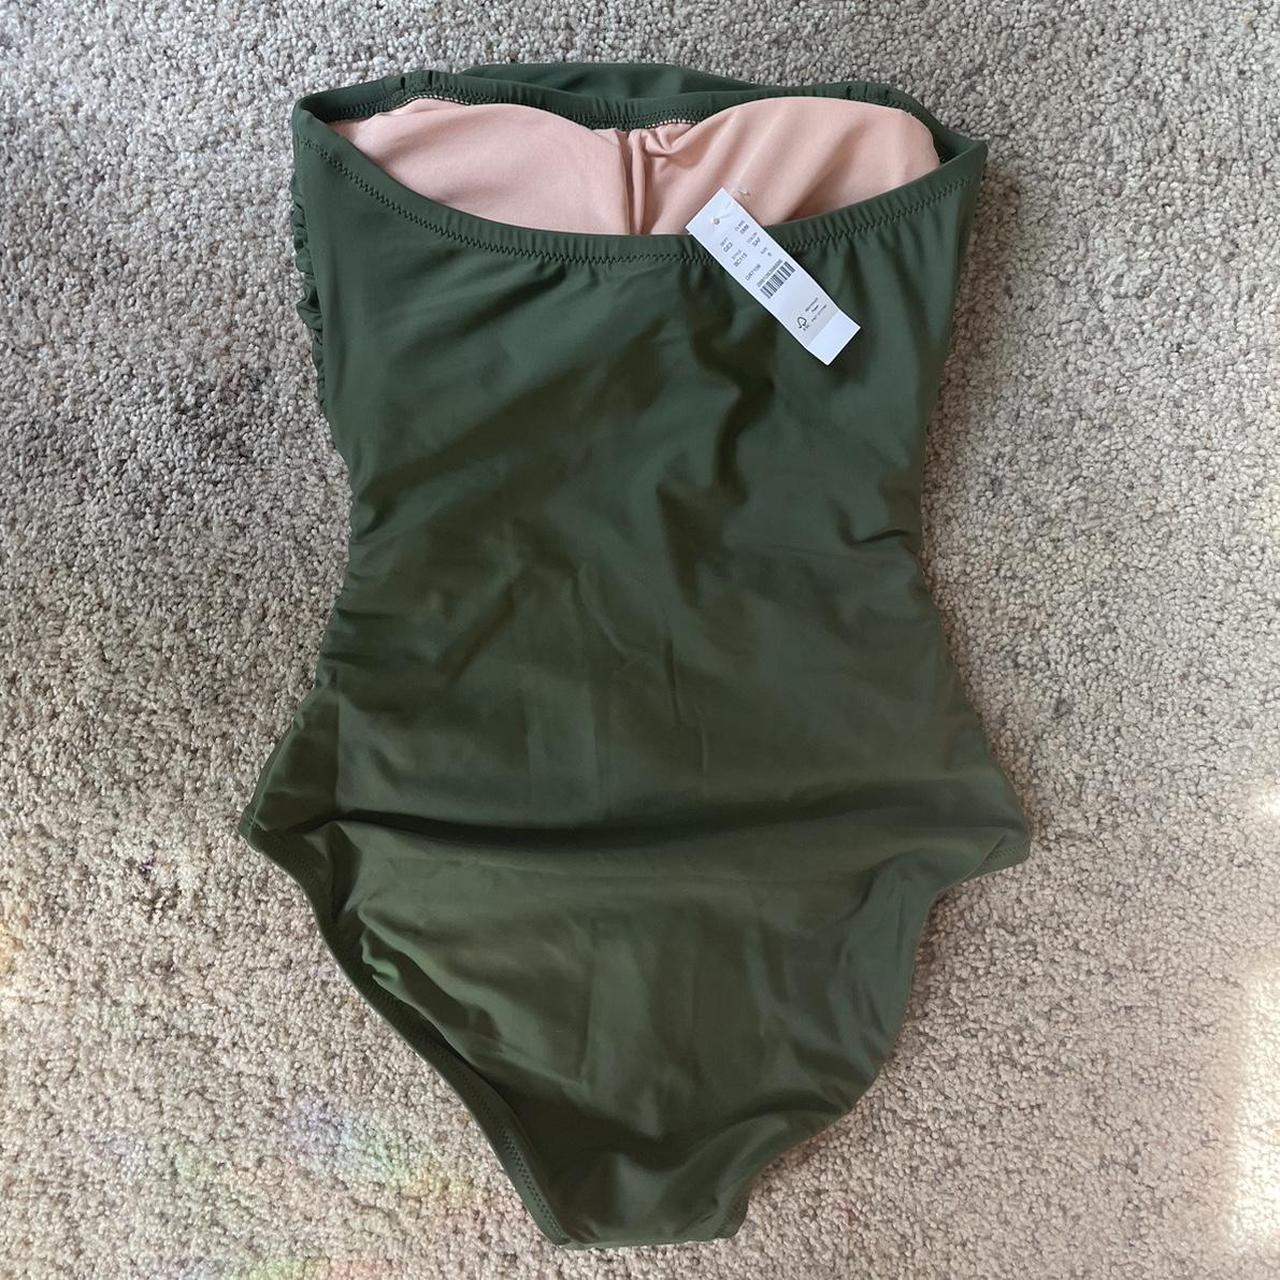 J.CREW “Ruched bandeau one-piece” IN THE COLOR... - Depop